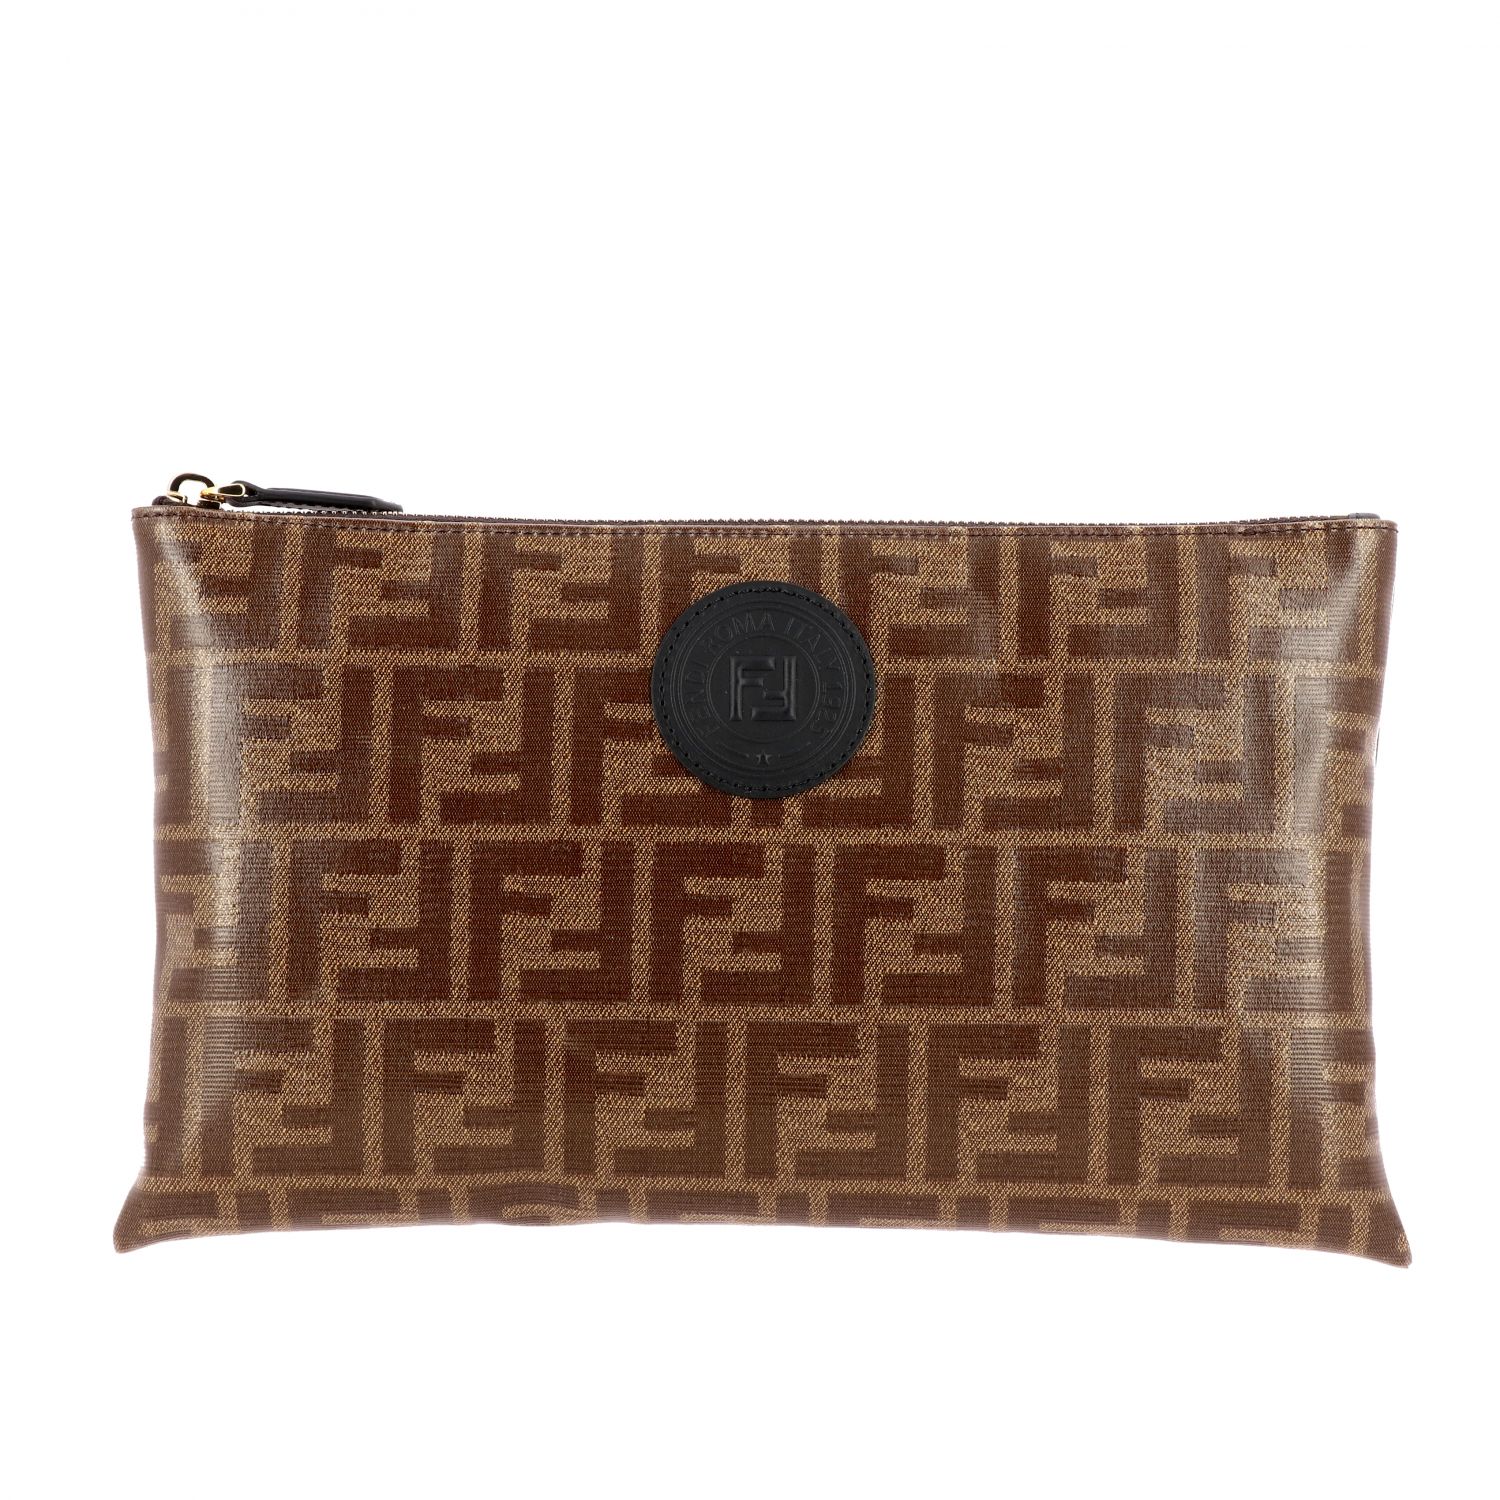 FENDI: Clutch bag in vitrified leather with FF print and leather badge ...